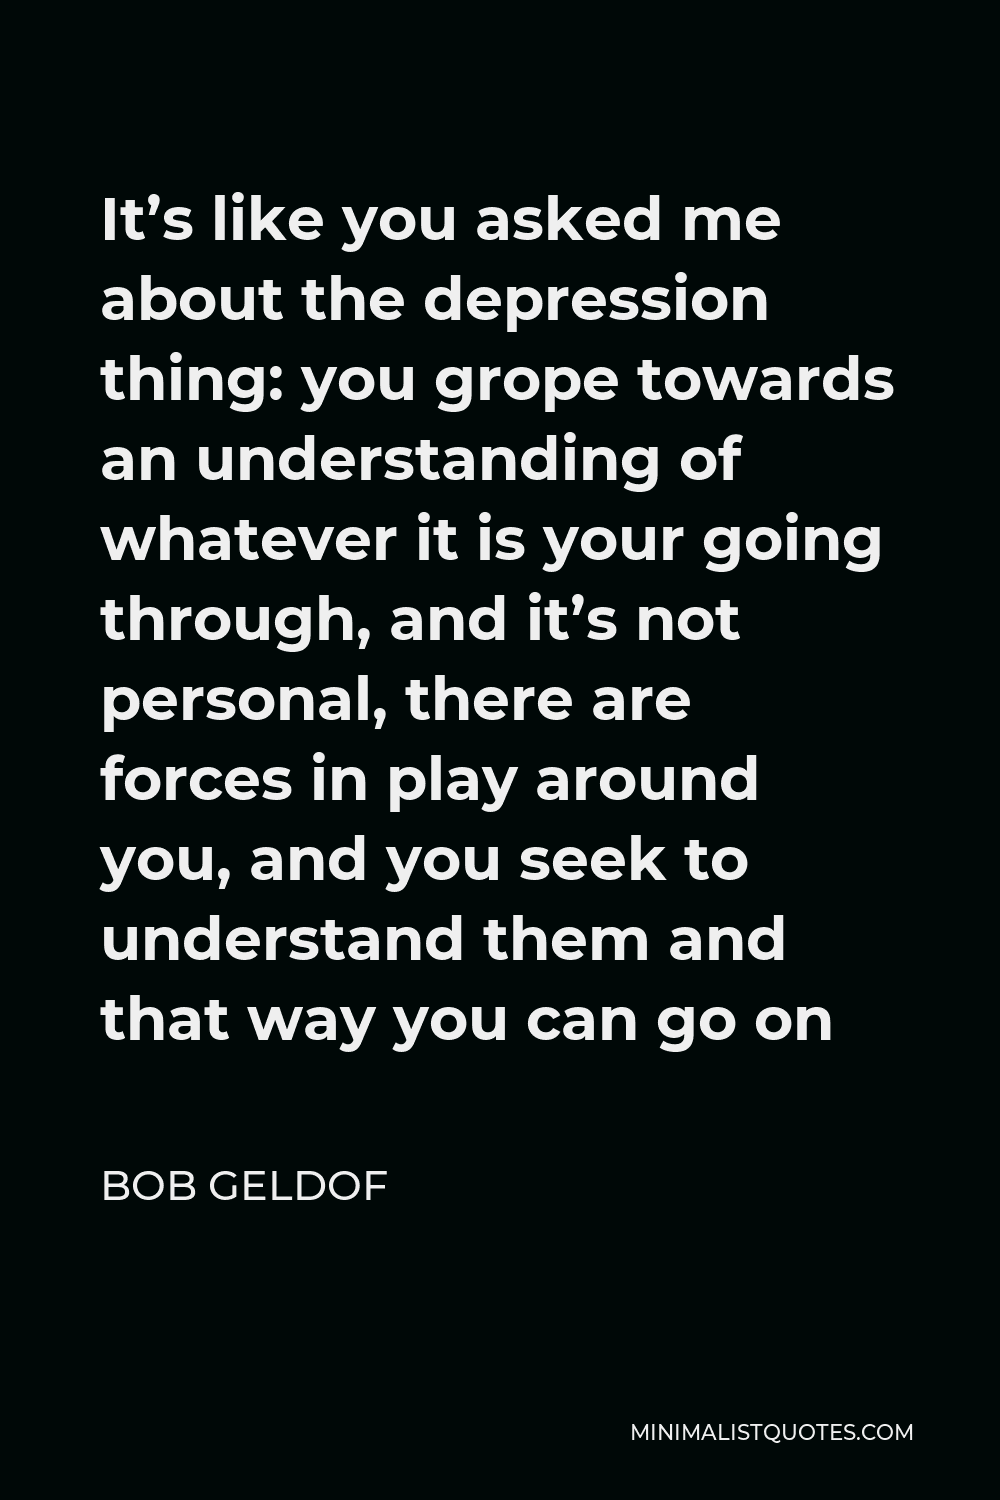 Bob Geldof Quote - It’s like you asked me about the depression thing: you grope towards an understanding of whatever it is your going through, and it’s not personal, there are forces in play around you, and you seek to understand them and that way you can go on